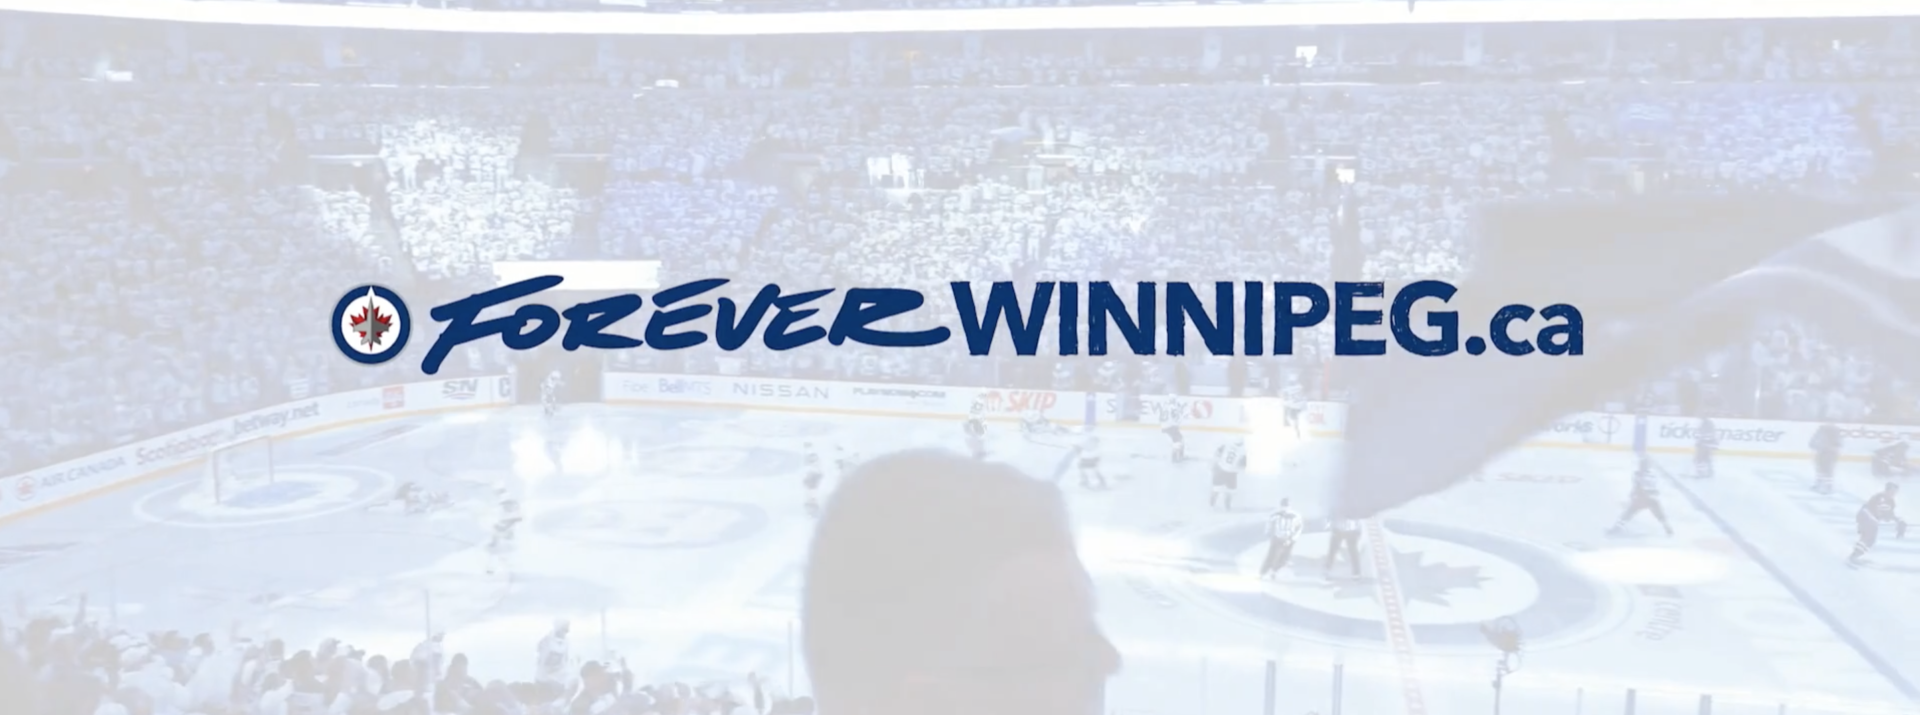 A home game of a Jets Hockey game in an area is full of Jets Fans. The title overlays the image, the text reading: "Foreverwinnipeg.ca"